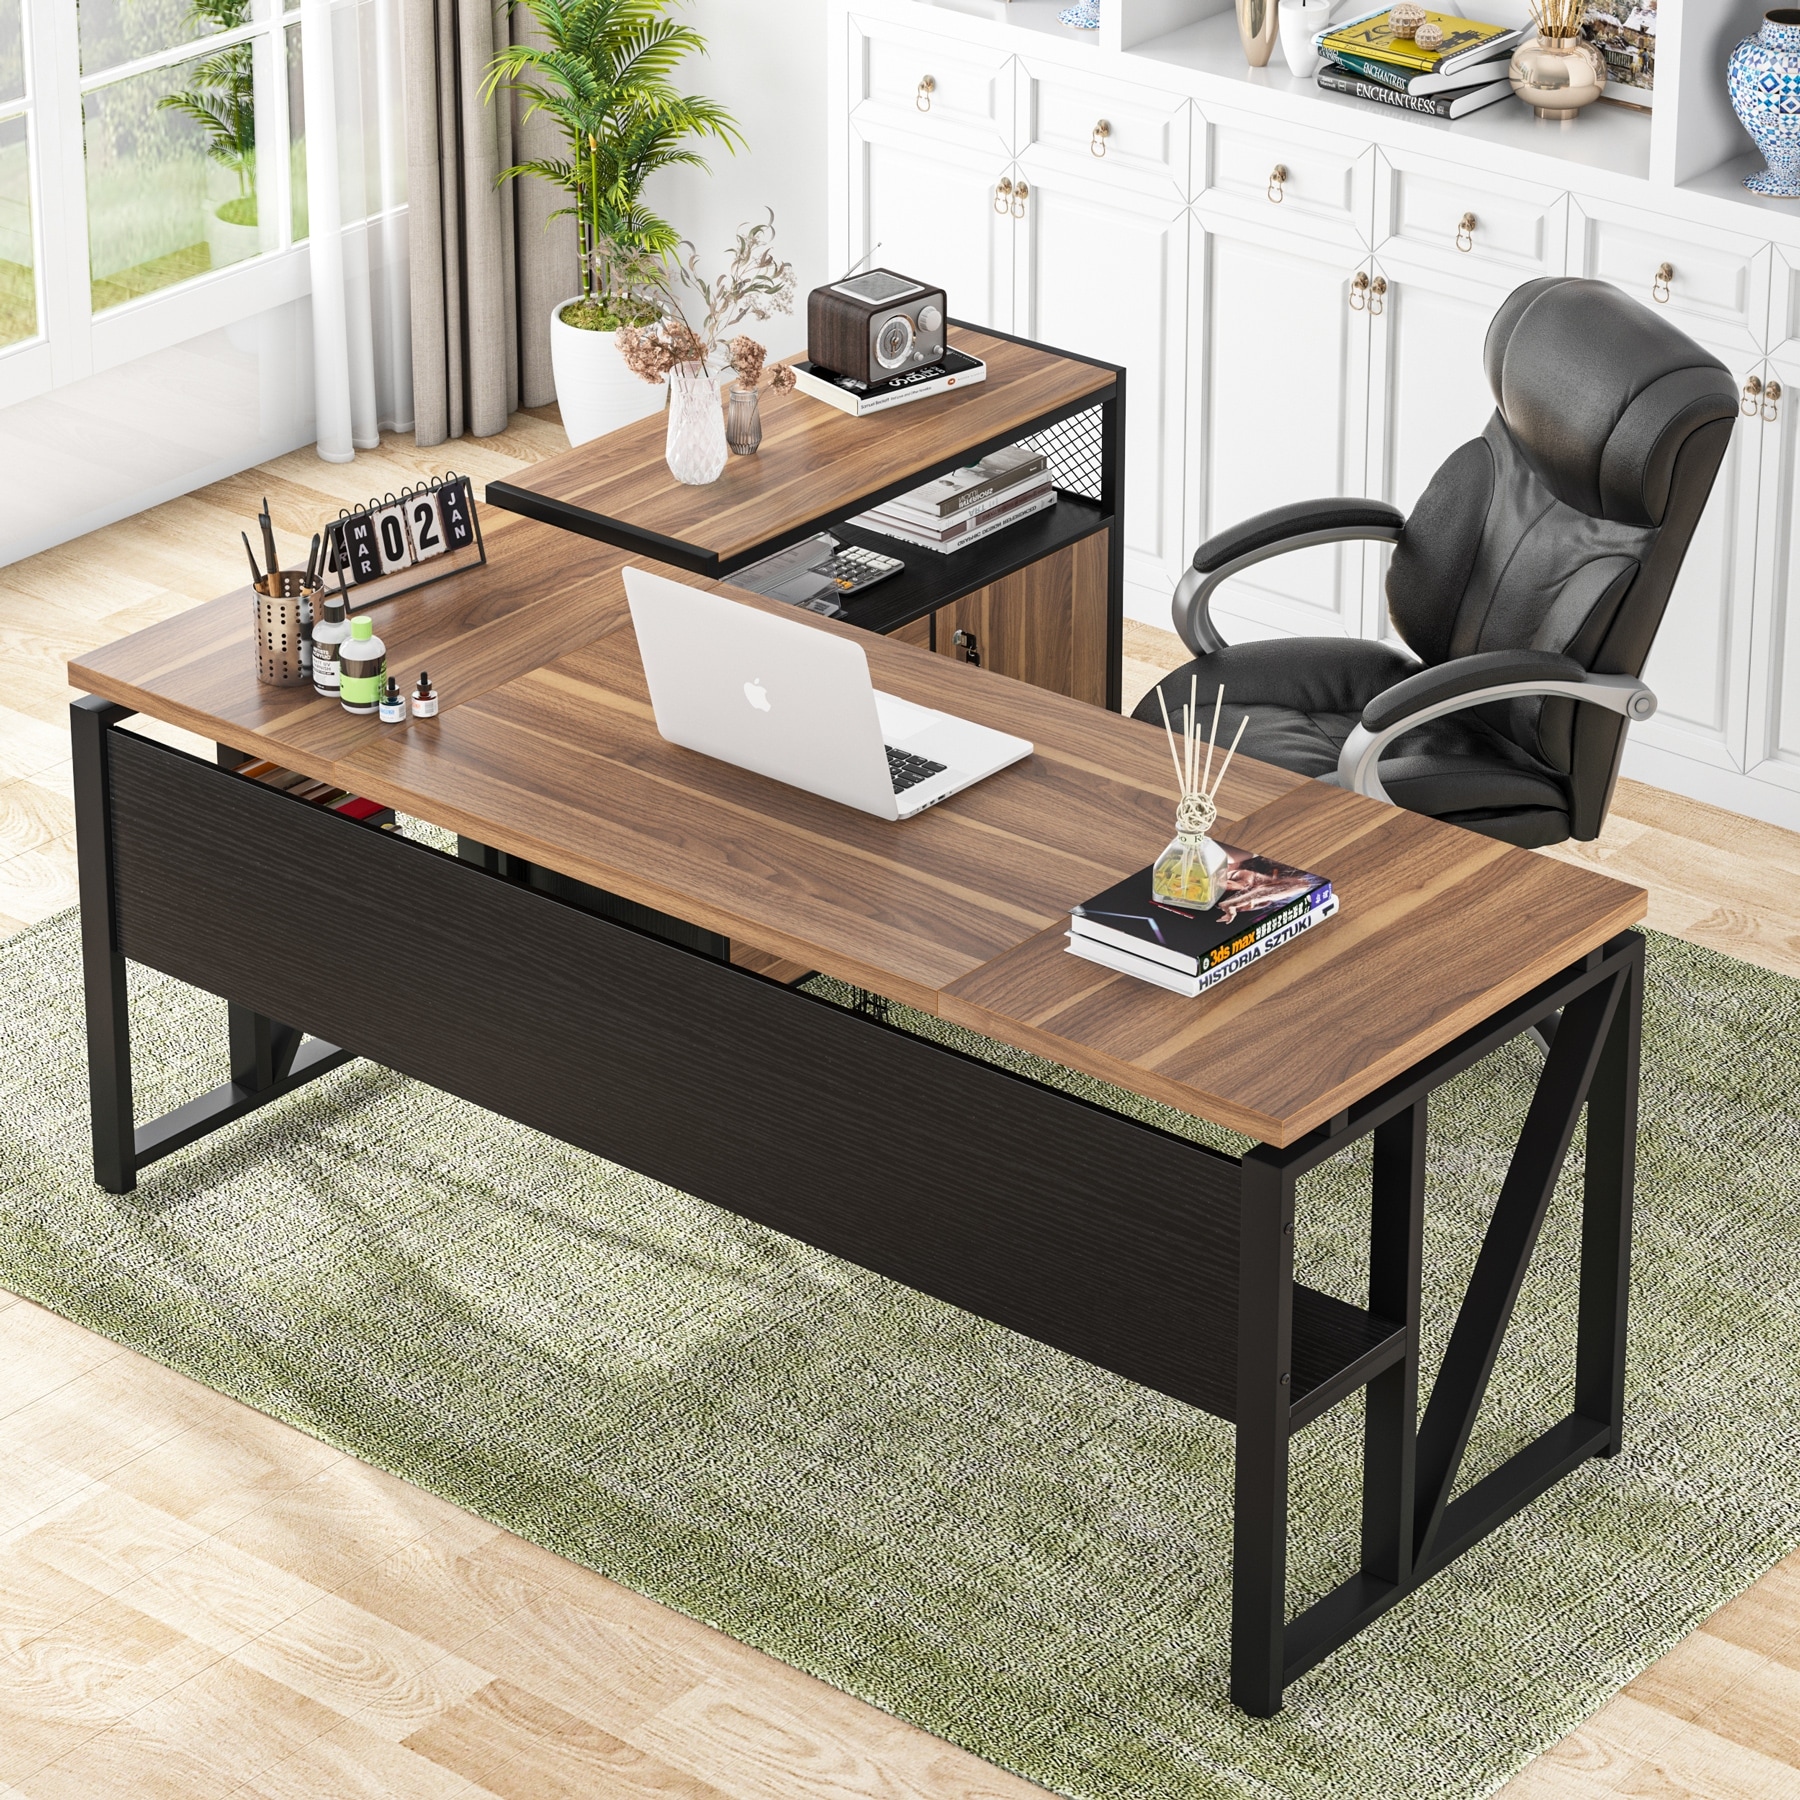 https://ak1.ostkcdn.com/images/products/is/images/direct/ce09fb31065ff017854ee7ea0b58dc7173137431/L-Shaped-Desk-with-Drawer%2C-Executive-Desk-and-lateral-File-Cabinet%2C-2-Piece-Home-Office-Furniture.jpg